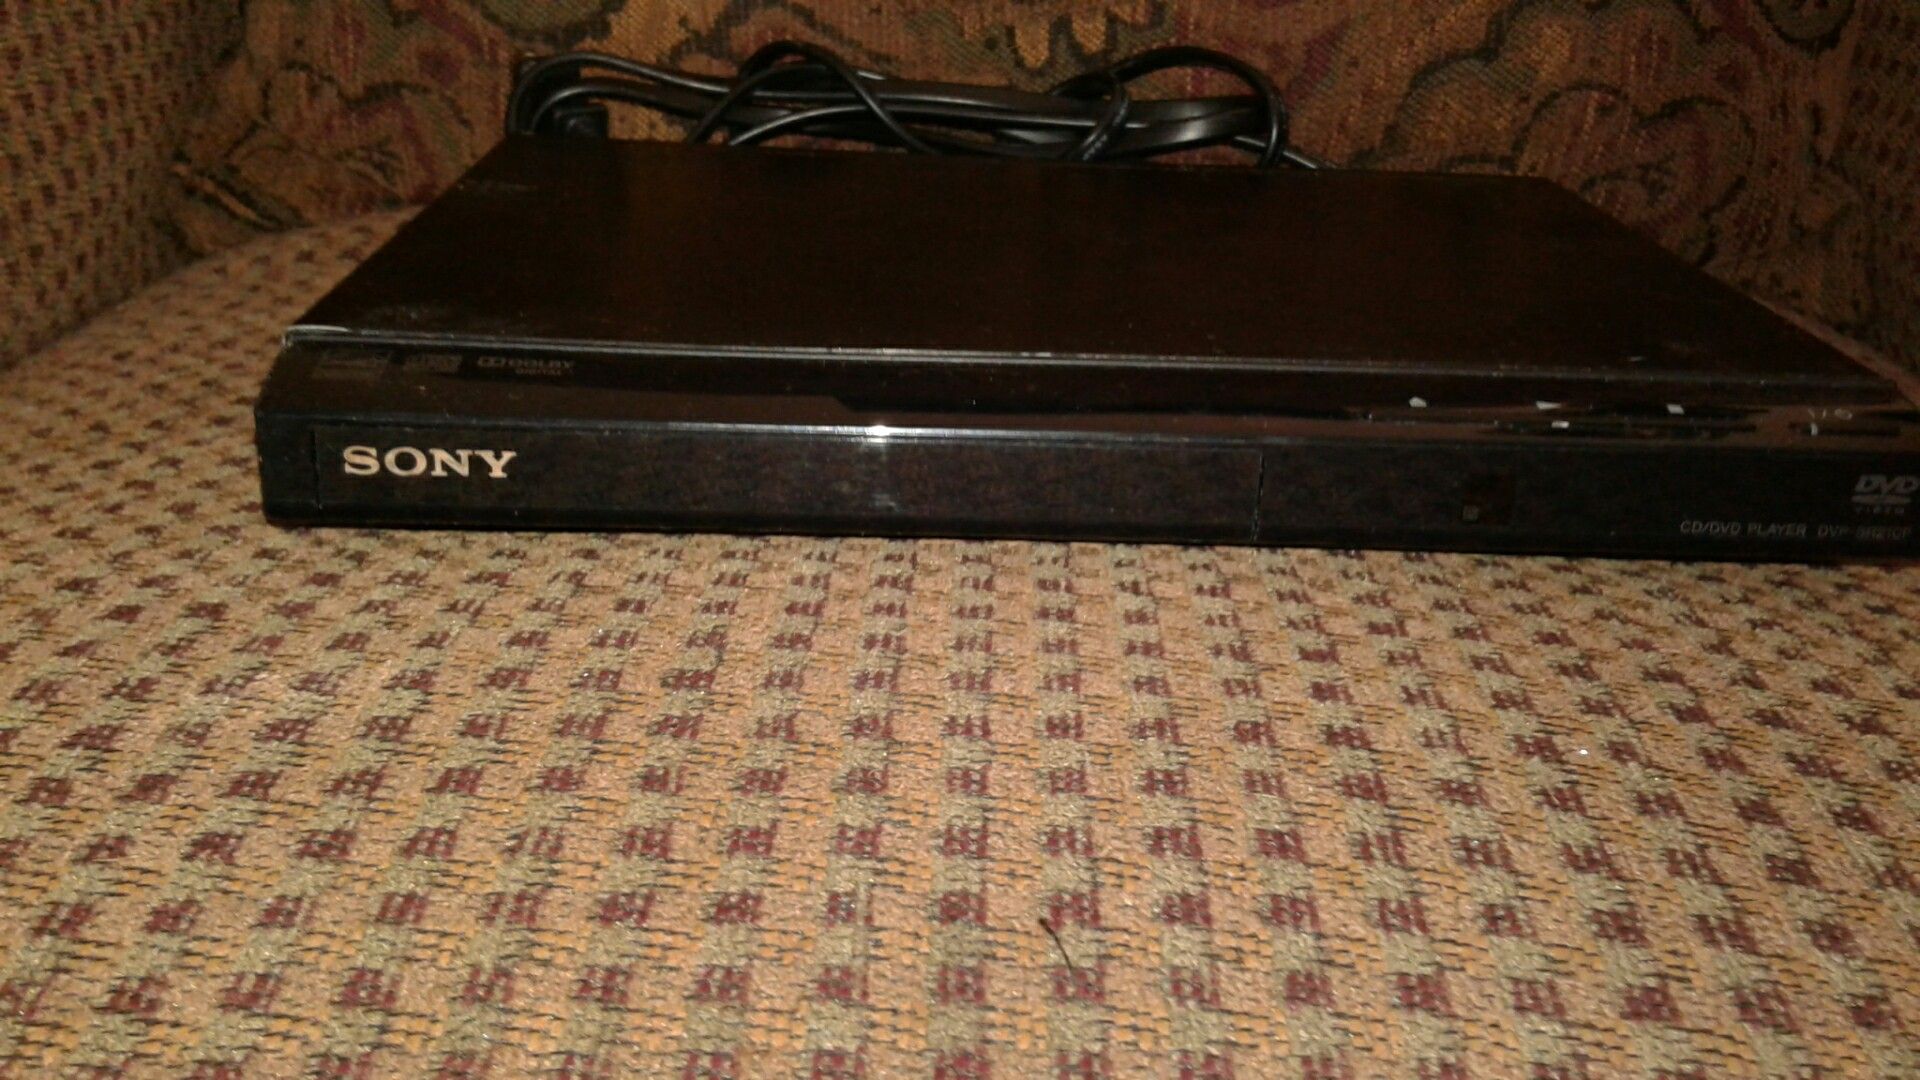 Sony DVD Player works great $20.00